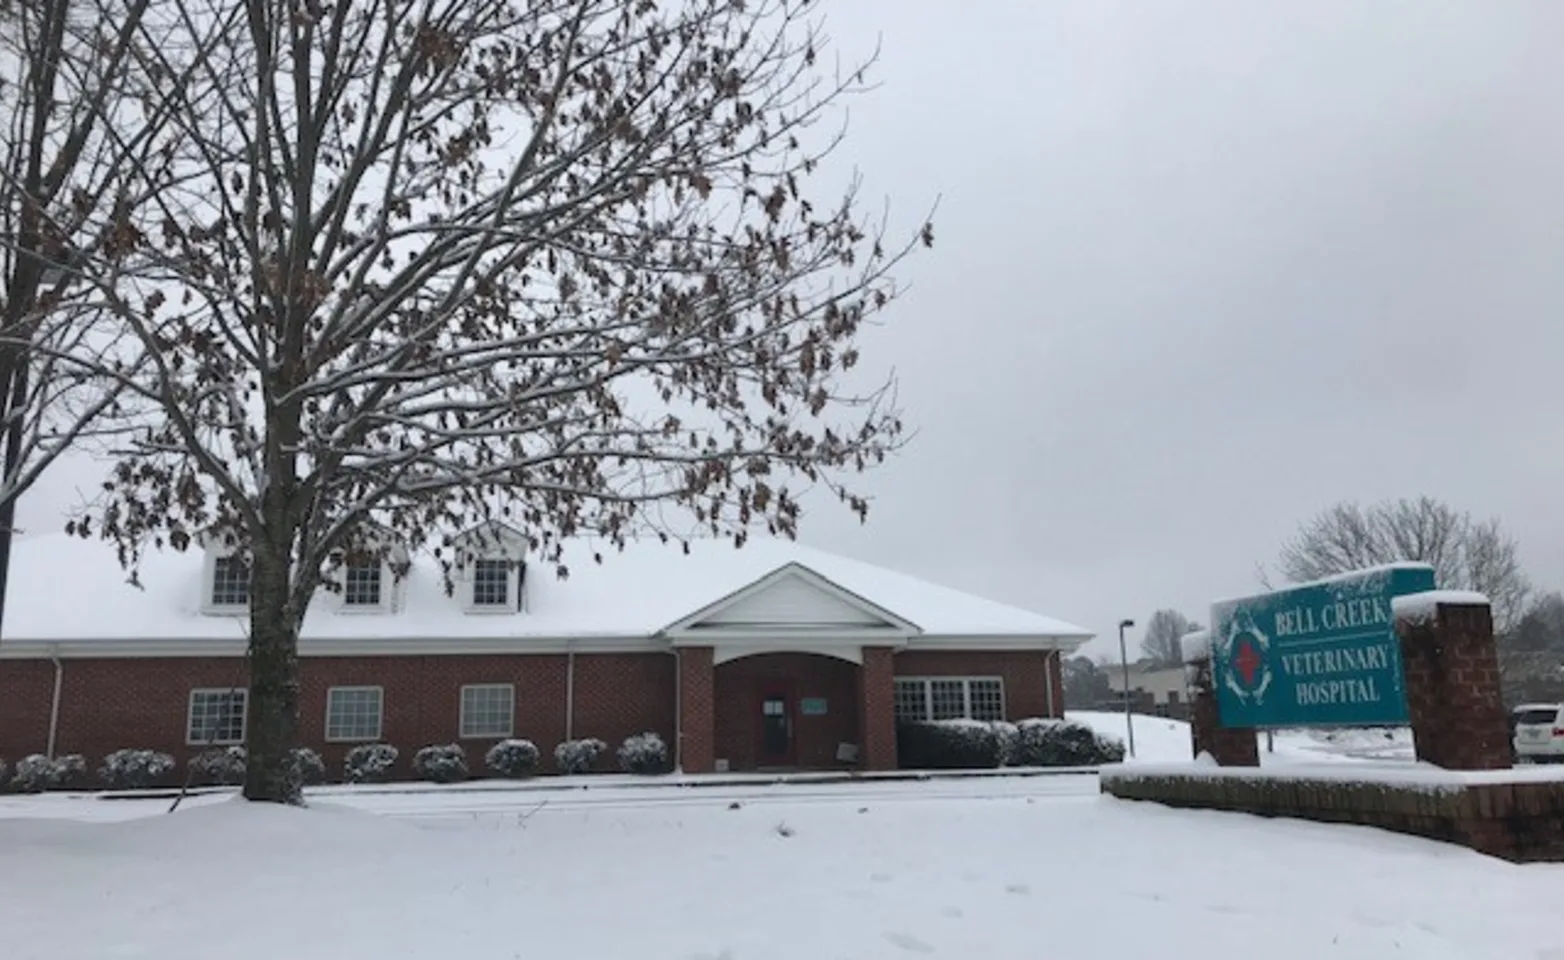 Bell Creek Veterinary Hospital covered in snow